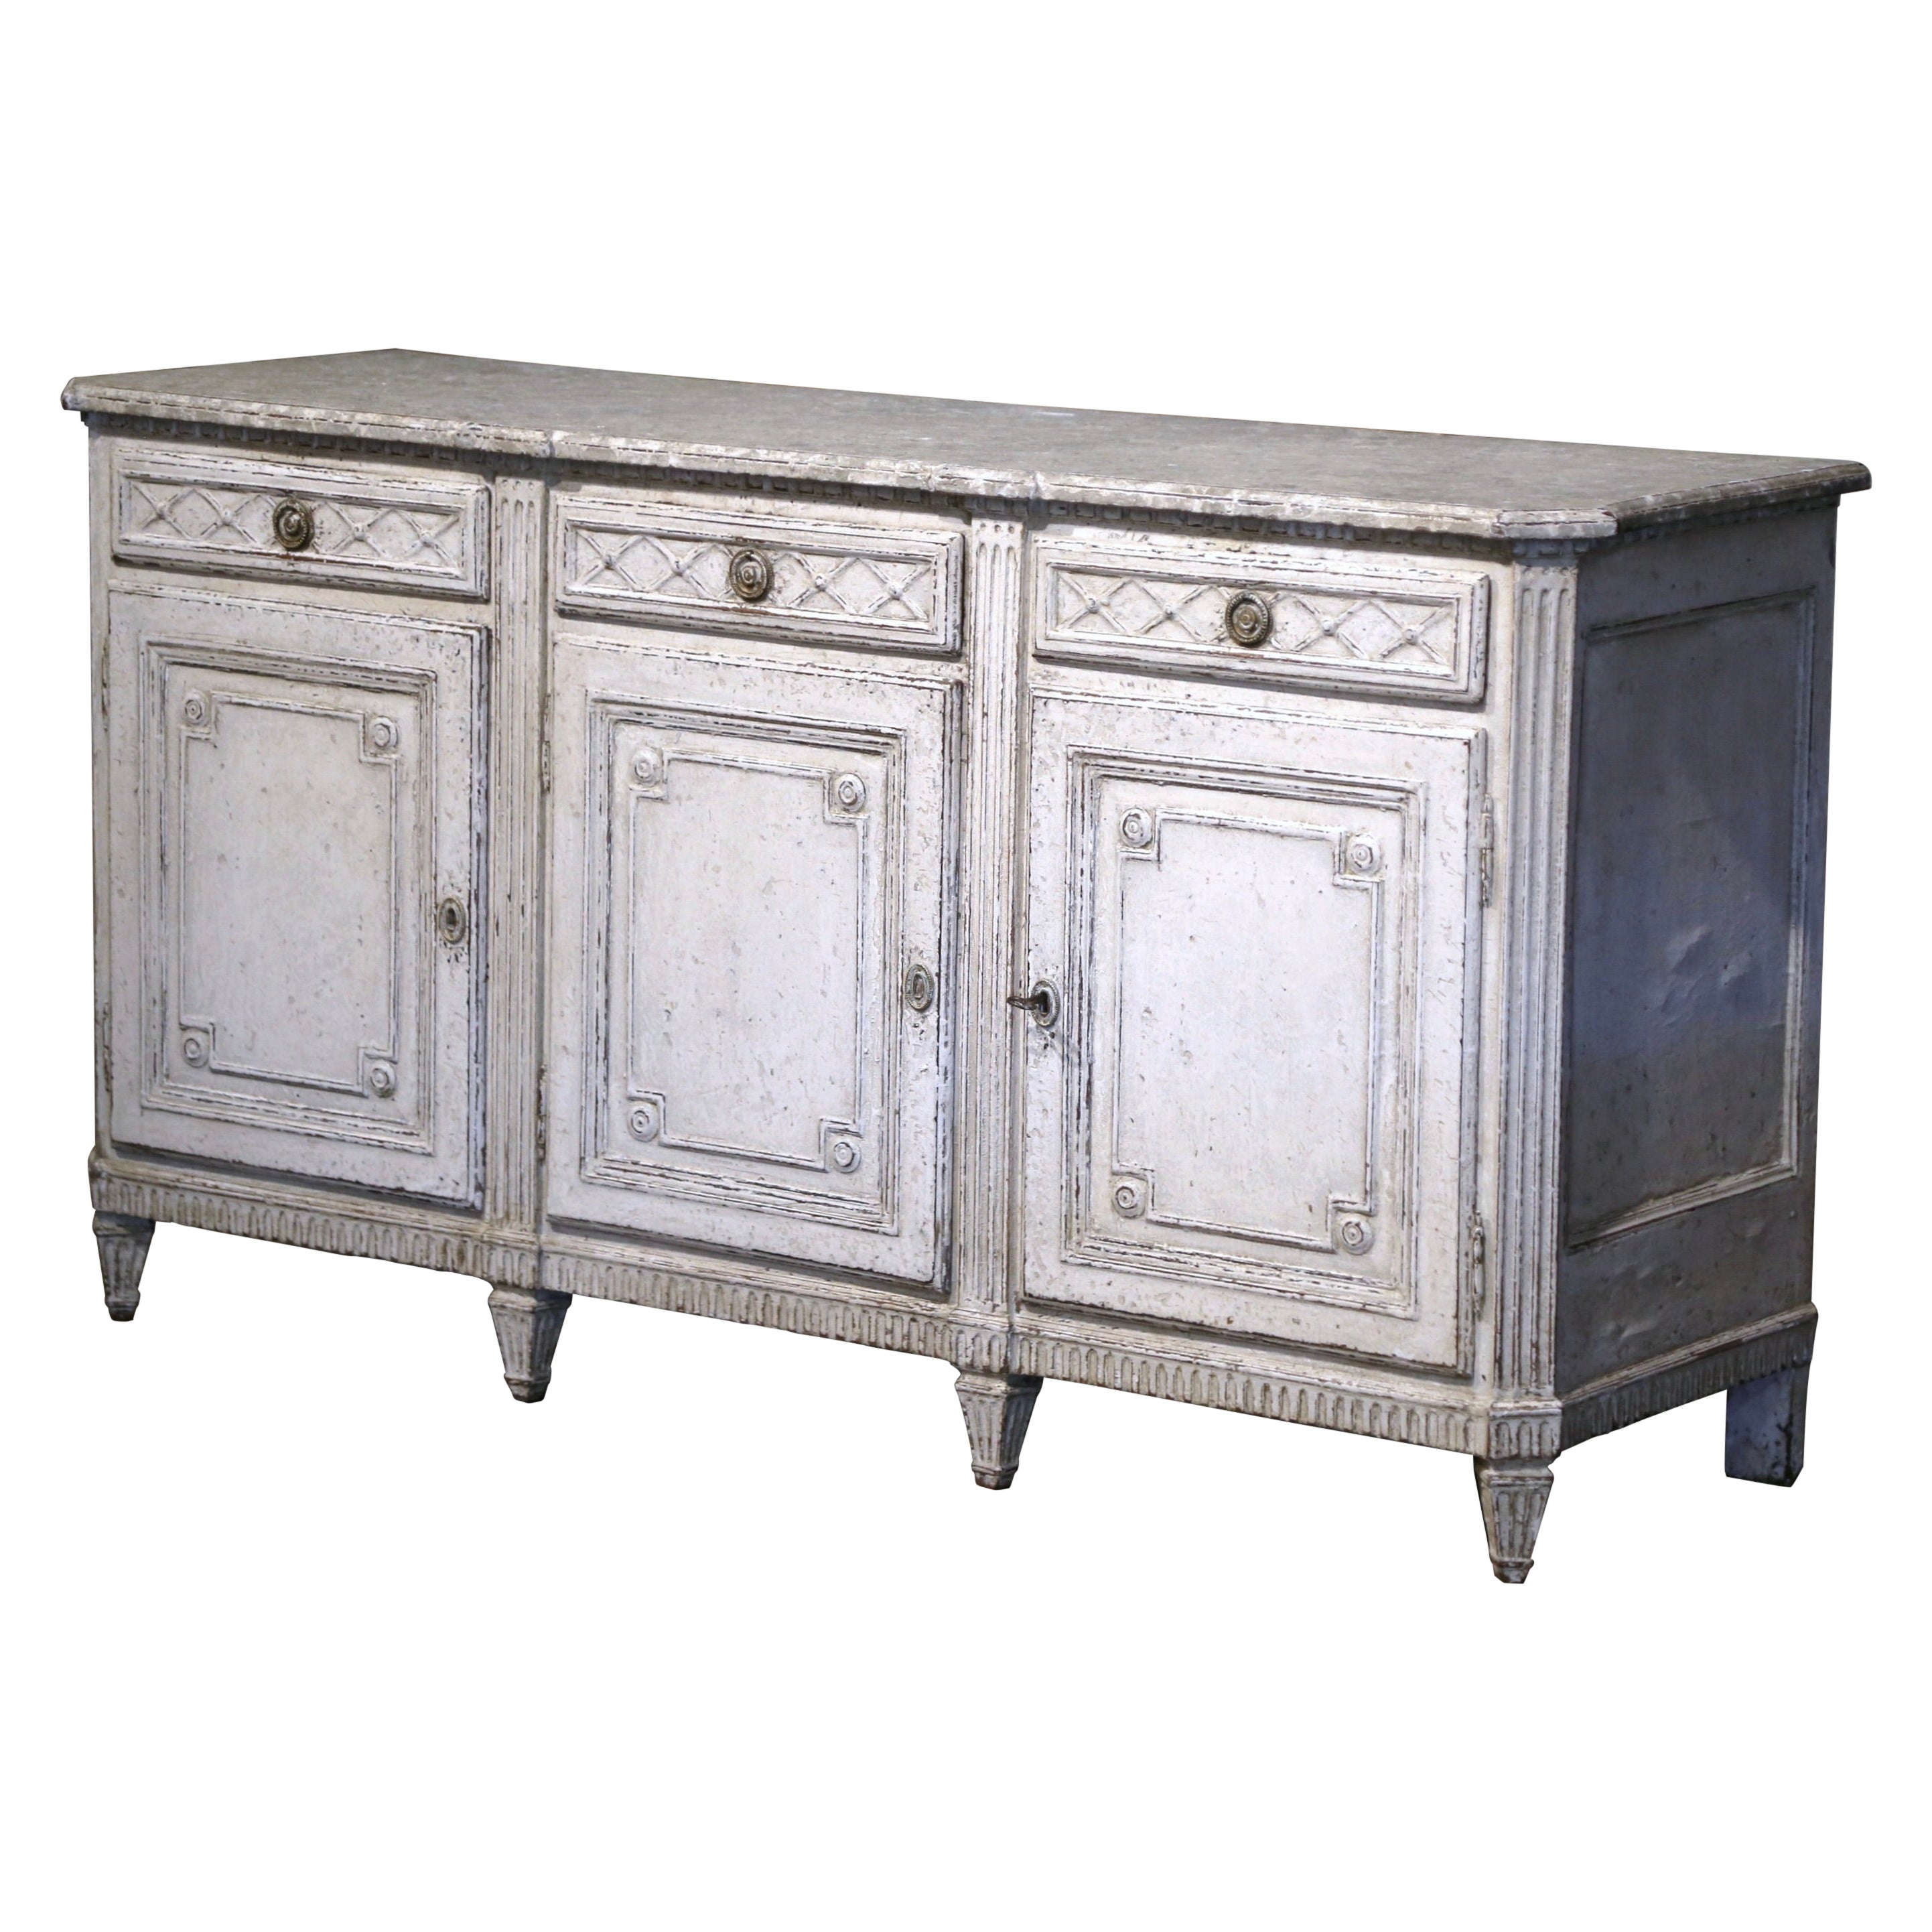 19th Century French Louis XVI Carved Painted Three-Door Buffet with Drawers For Sale